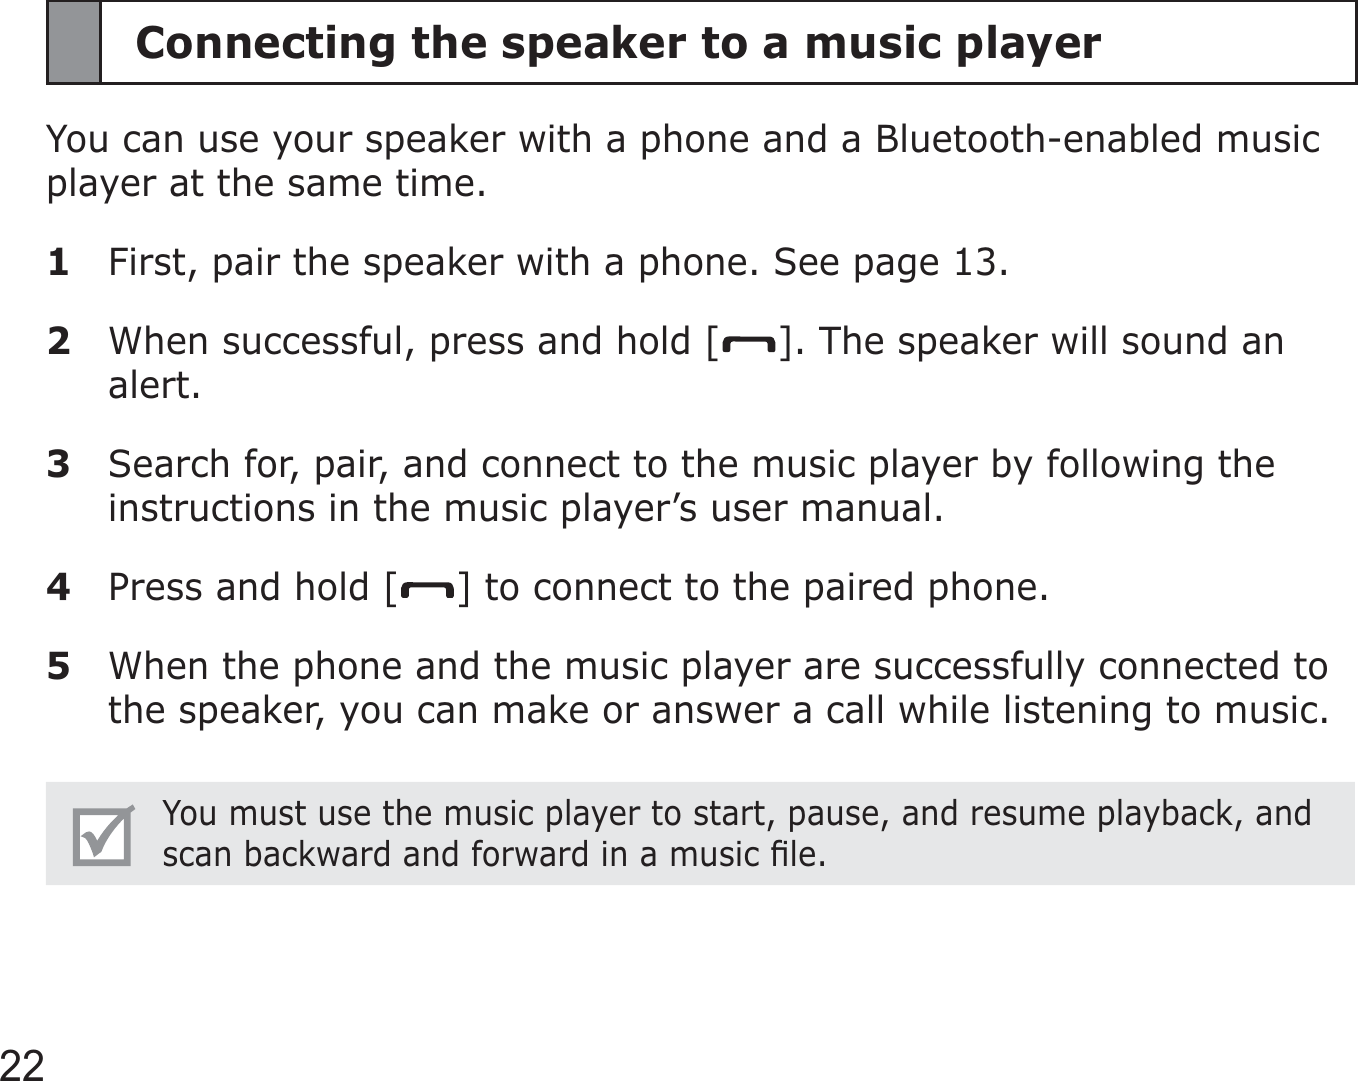 22Connecting the speaker to a music playerYou can use your speaker with a phone and a Bluetooth-enabled music player at the same time.1  First, pair the speaker with a phone. See page 13.2  When successful, press and hold [ ]. The speaker will sound an alert.3  Search for, pair, and connect to the music player by following the instructions in the music player’s user manual.4  Press and hold [ ] to connect to the paired phone.5  When the phone and the music player are successfully connected to the speaker, you can make or answer a call while listening to music.You must use the music player to start, pause, and resume playback, and scan backward and forward in a music ﬁle.